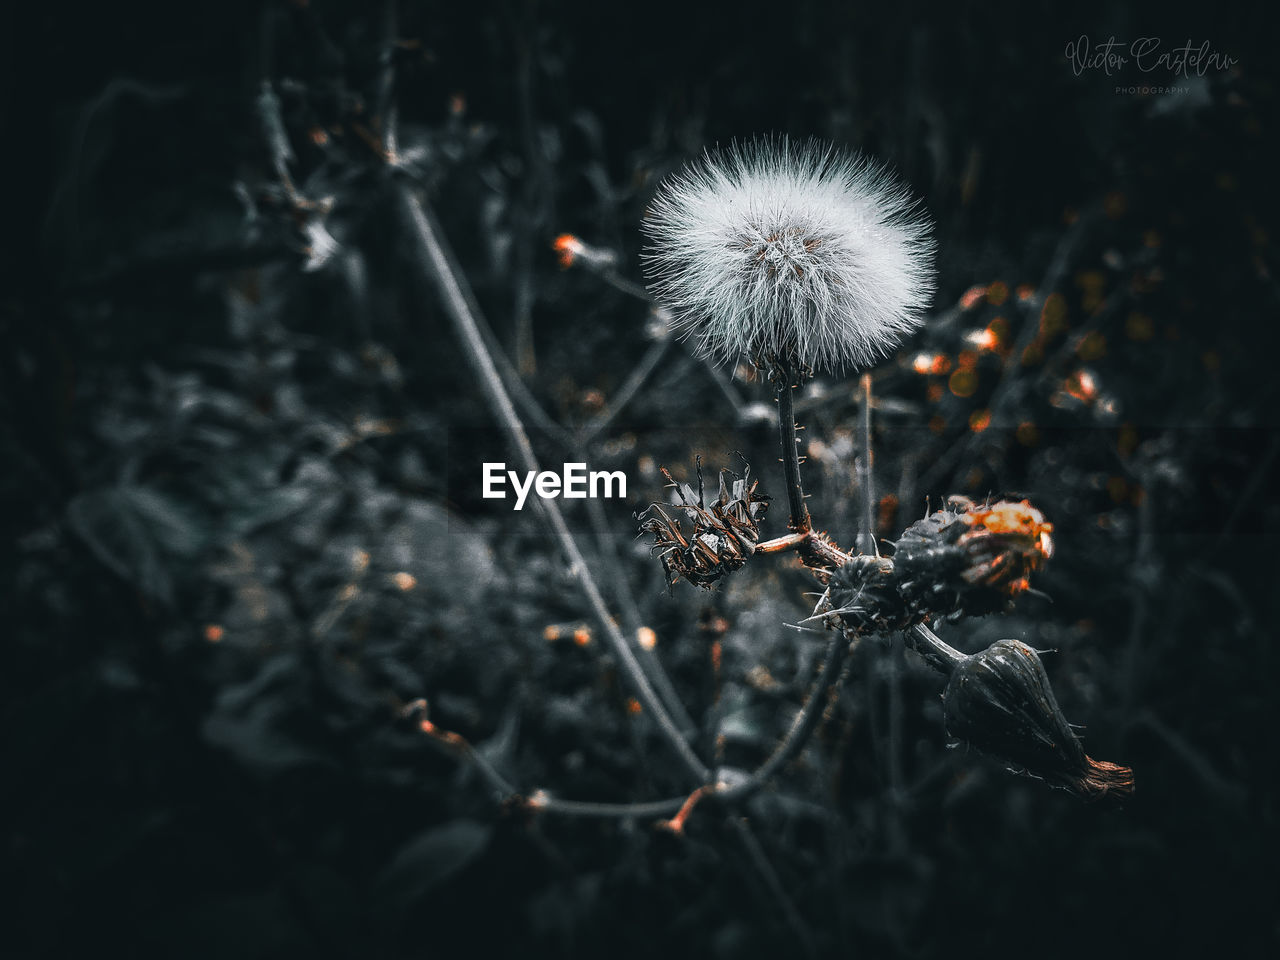 plant, flower, fragility, flowering plant, close-up, nature, beauty in nature, freshness, no people, macro photography, focus on foreground, growth, dandelion, outdoors, flower head, darkness, inflorescence, day, selective focus, tranquility, leaf, plant stem